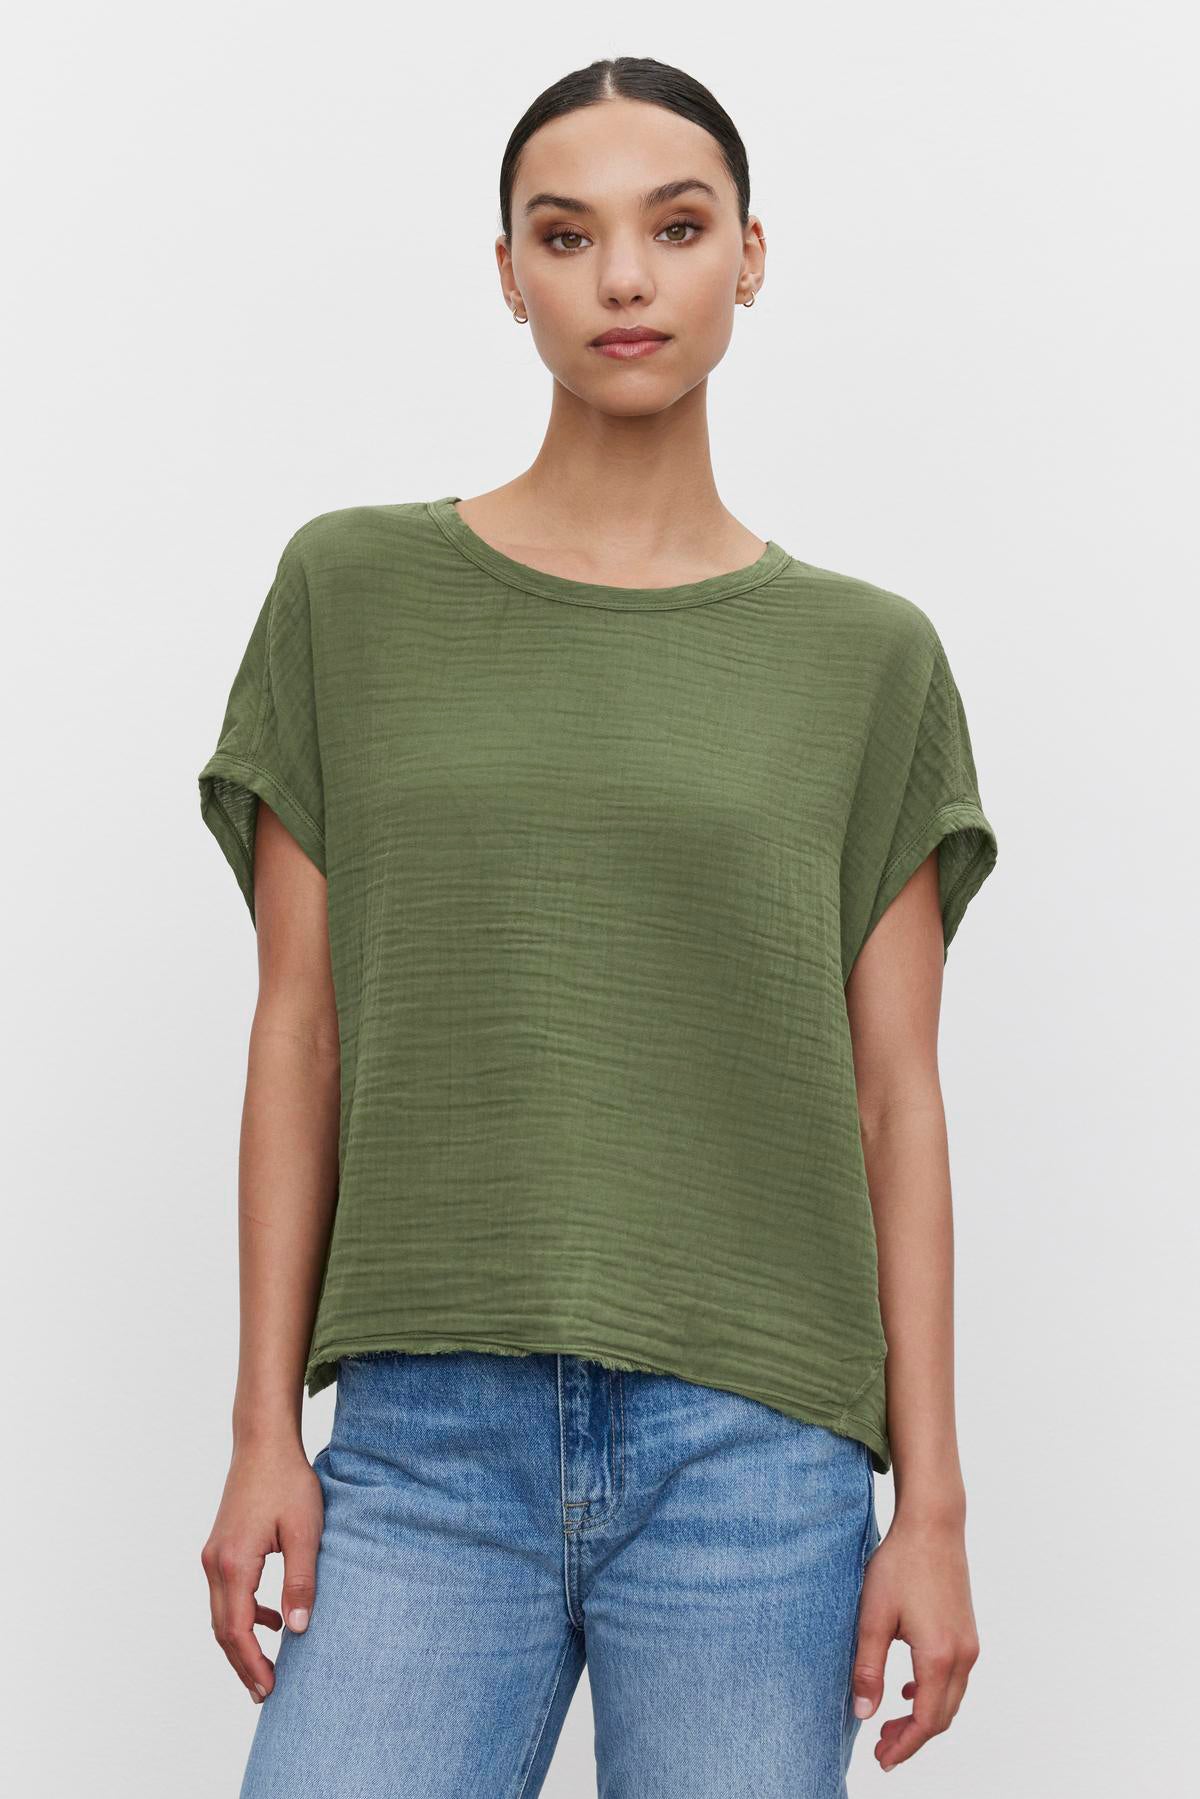 Young woman in a green CAROLINE COCOON TOP and blue jeans standing against a white background. Brand: Velvet by Graham & Spencer-36532940538049